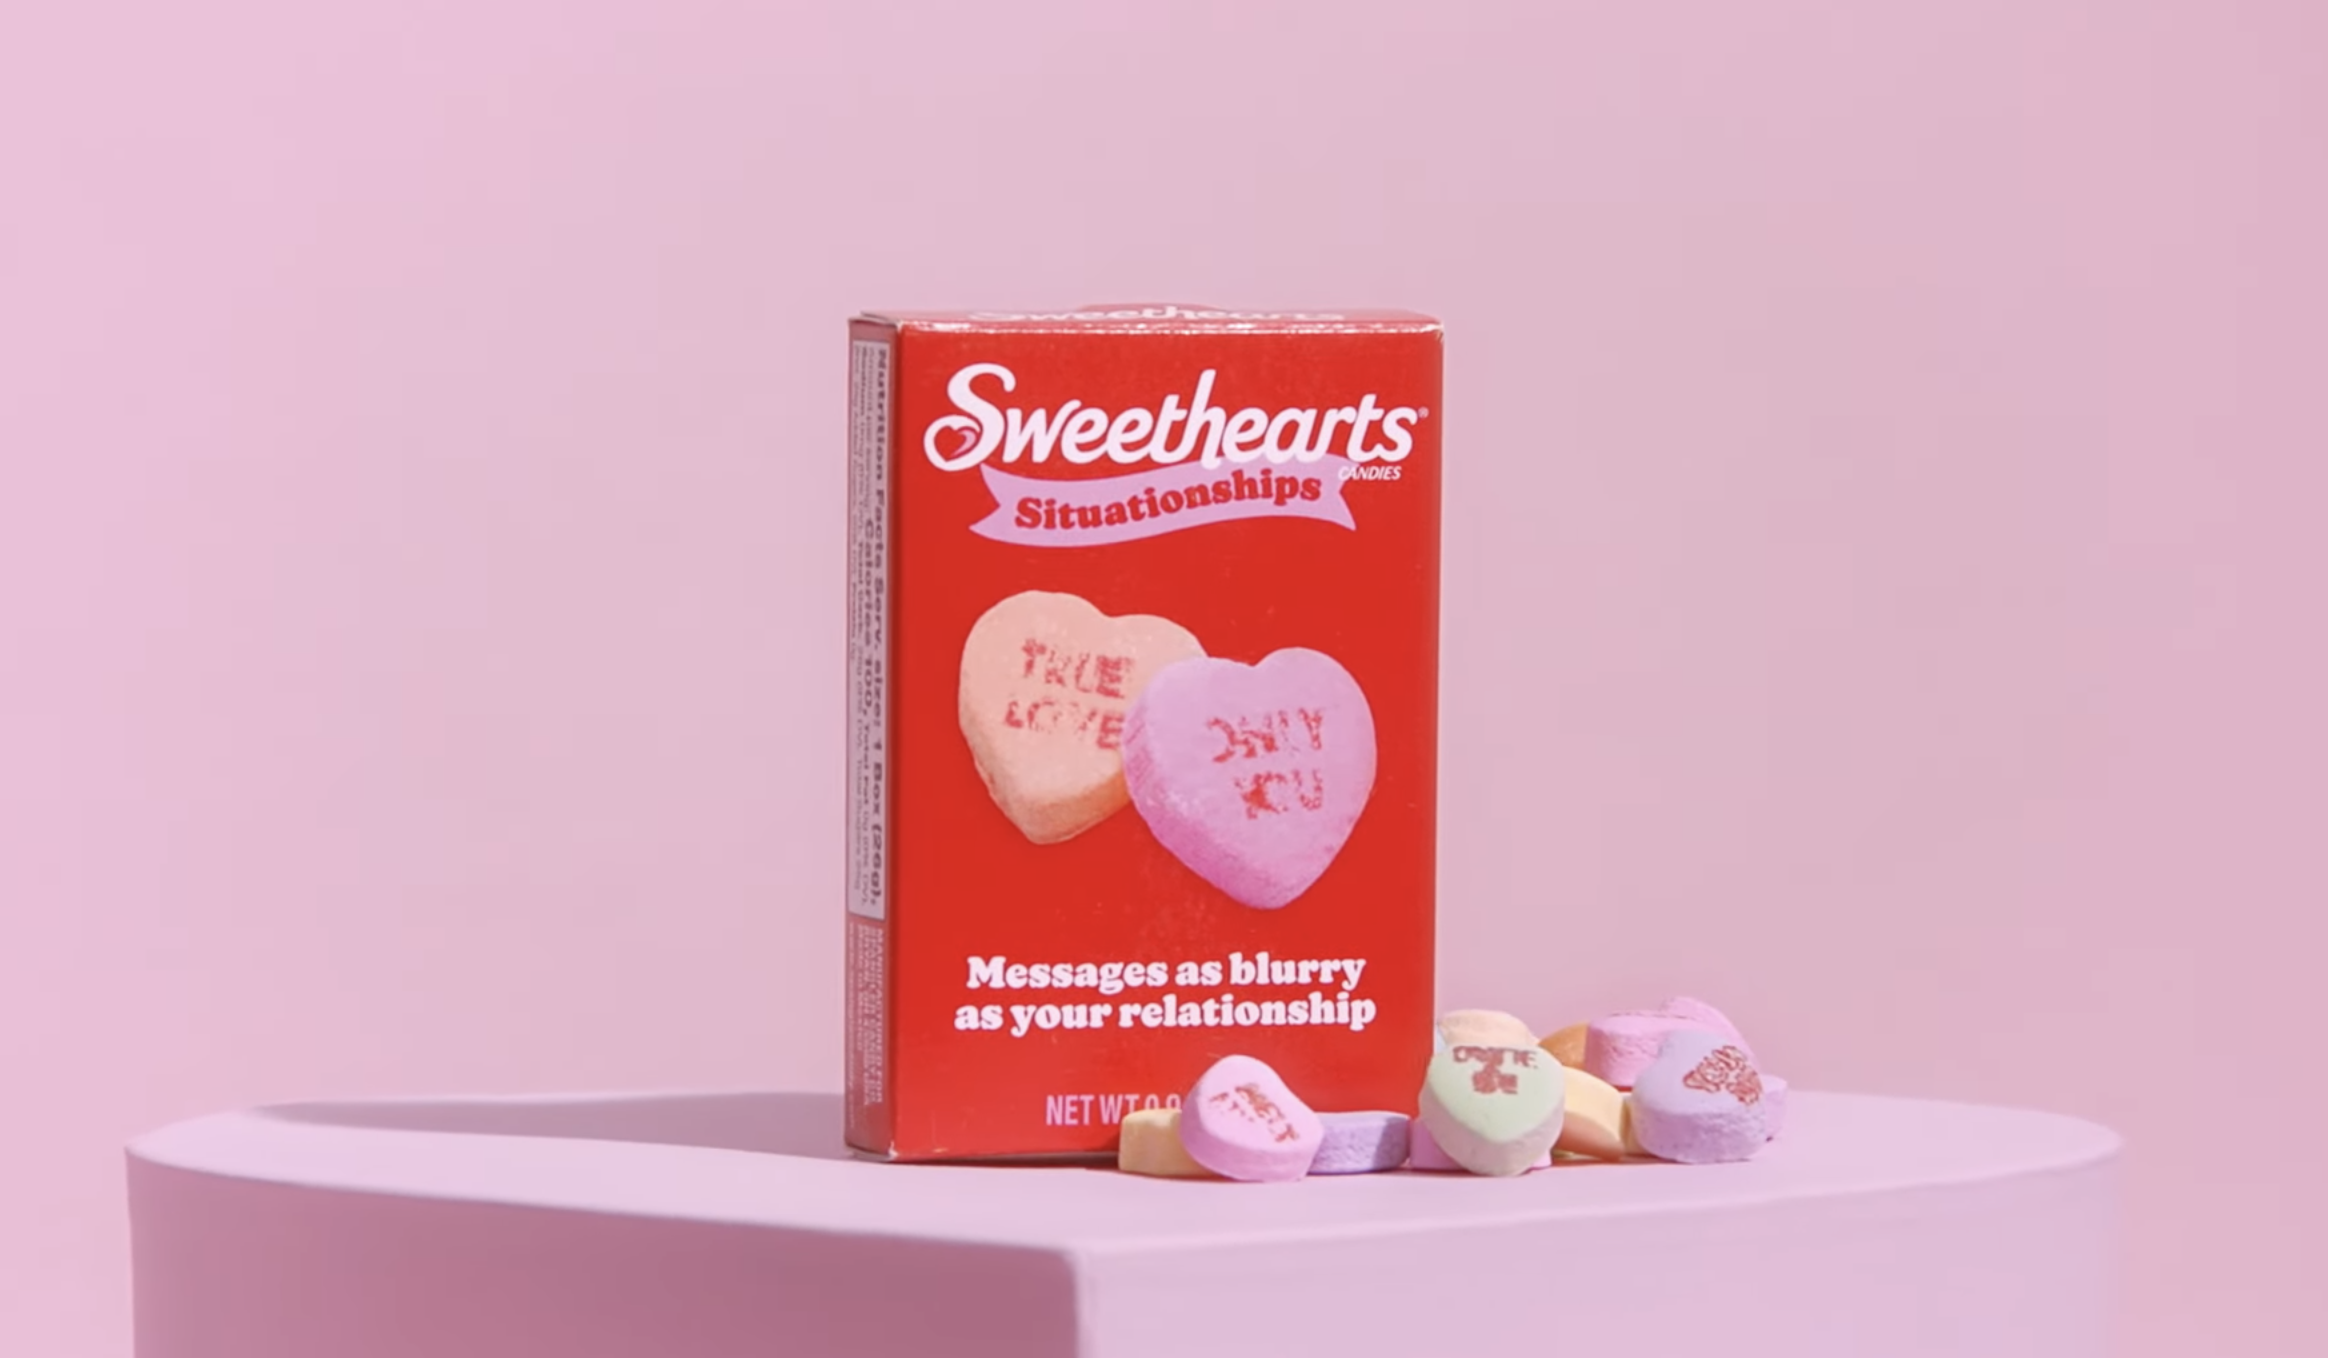 Situationships’ aren’t sweet, despite corporate candymakers’ attempts to convince you otherwise